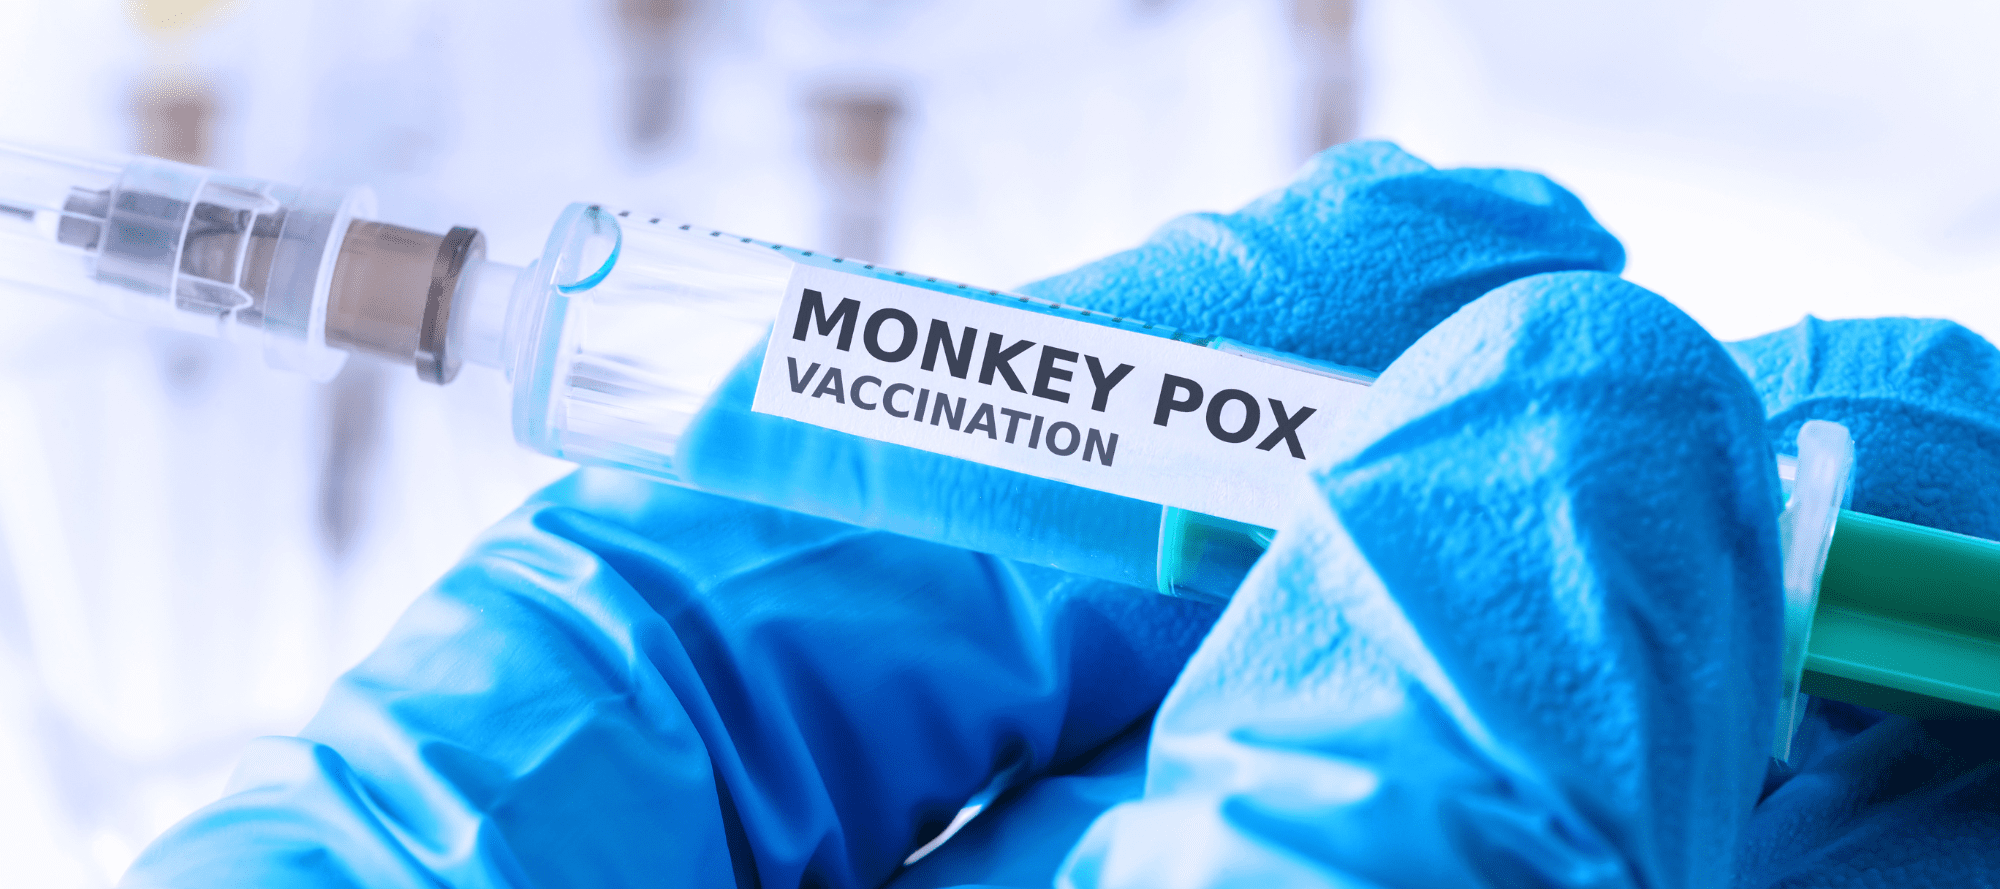 Person wearing medical grade gloves holding a filled syringe filled with Monkey Pox vaccine